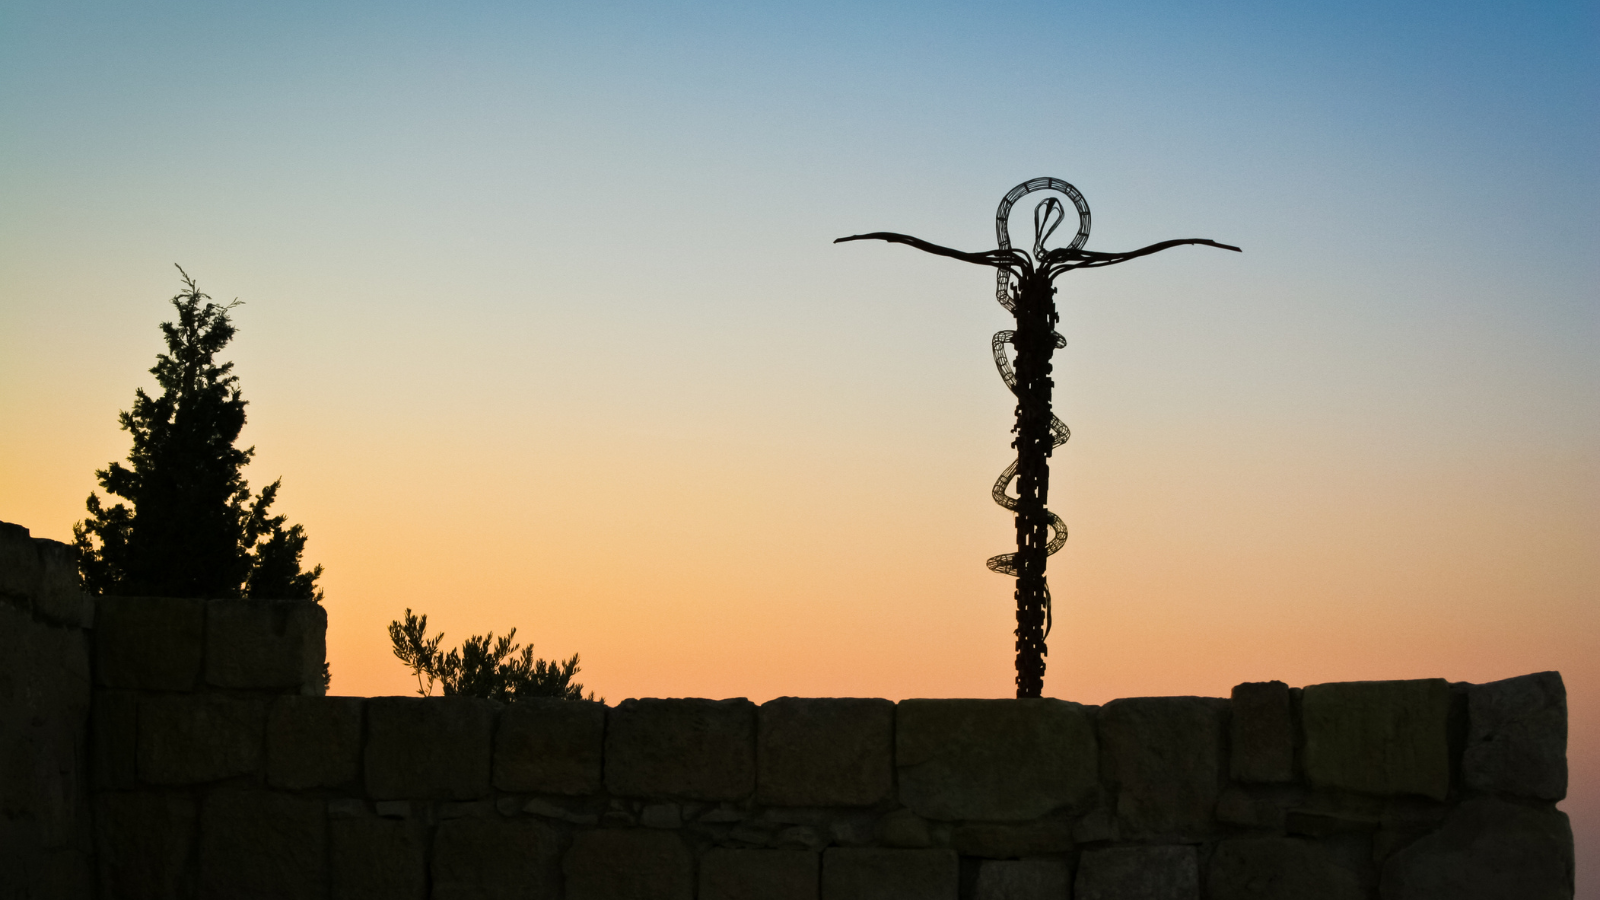 A view of the Serpant Statue at 5. Mount Nebo, Jordan at sunset.